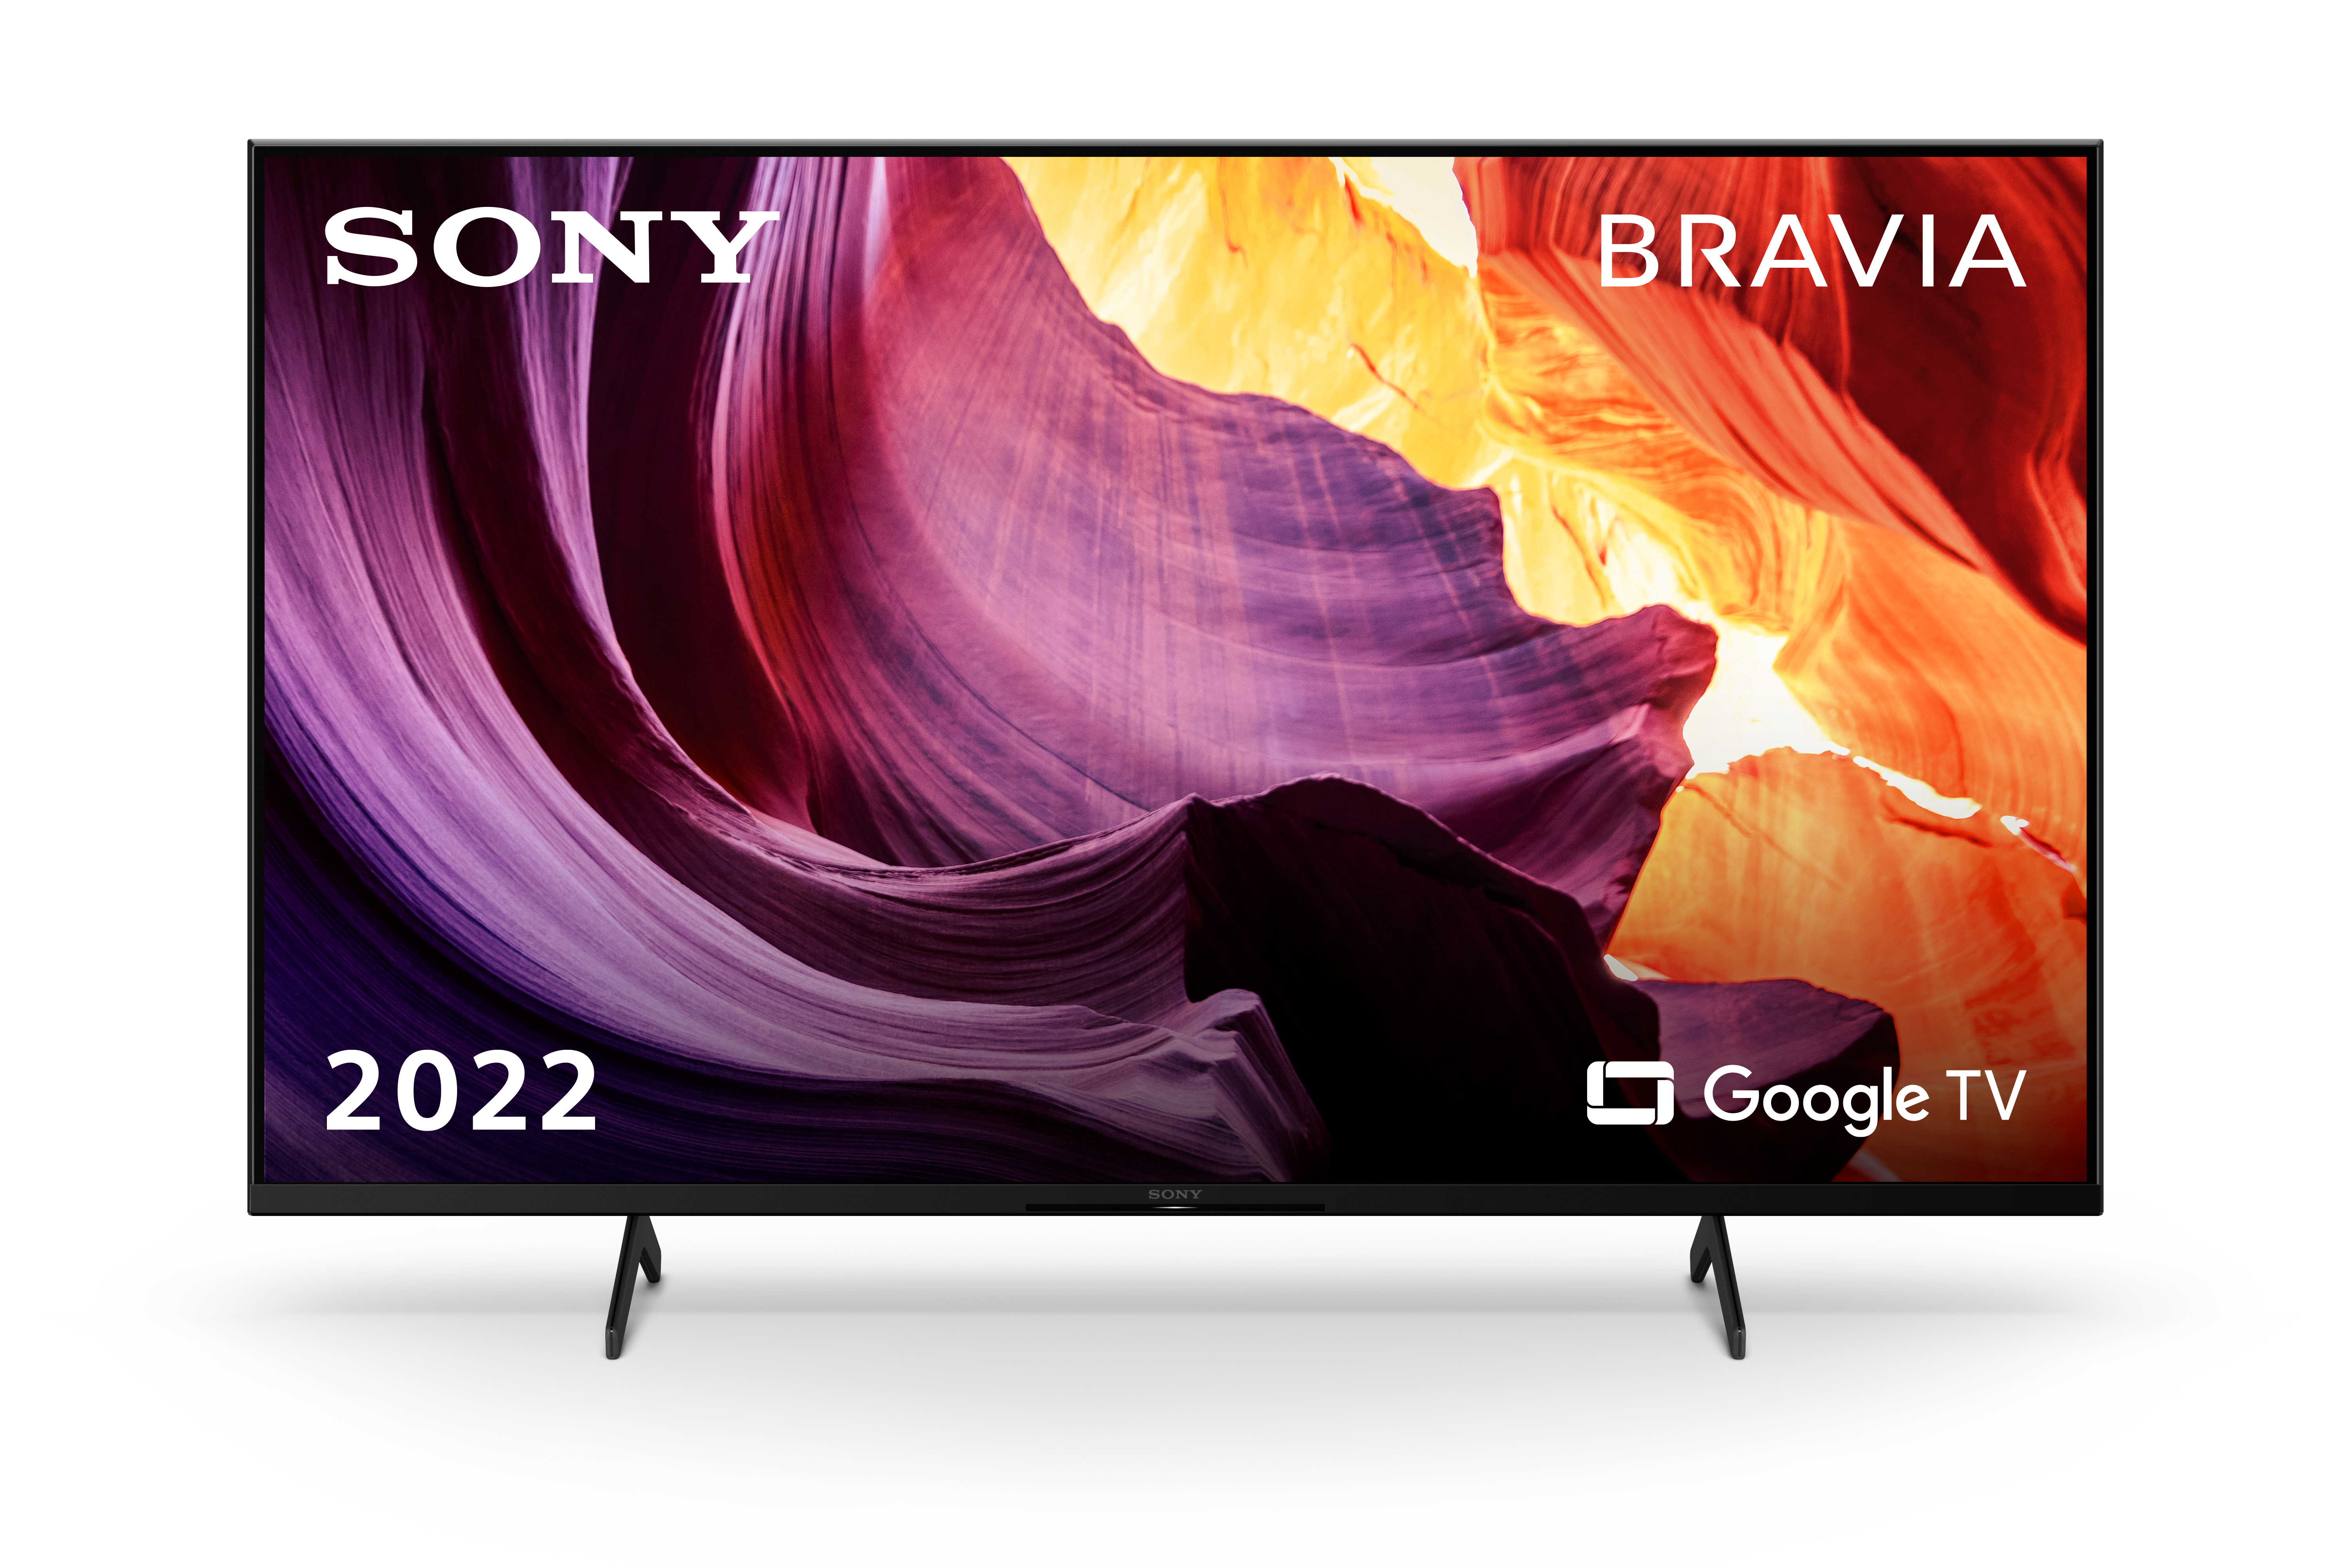 Image of Sony BRAVIA, KD-65X81K, Smart Google TV, 65”, LED, 4K UHD, HDR, Perfect for Playstation, con BRAVIA CORE